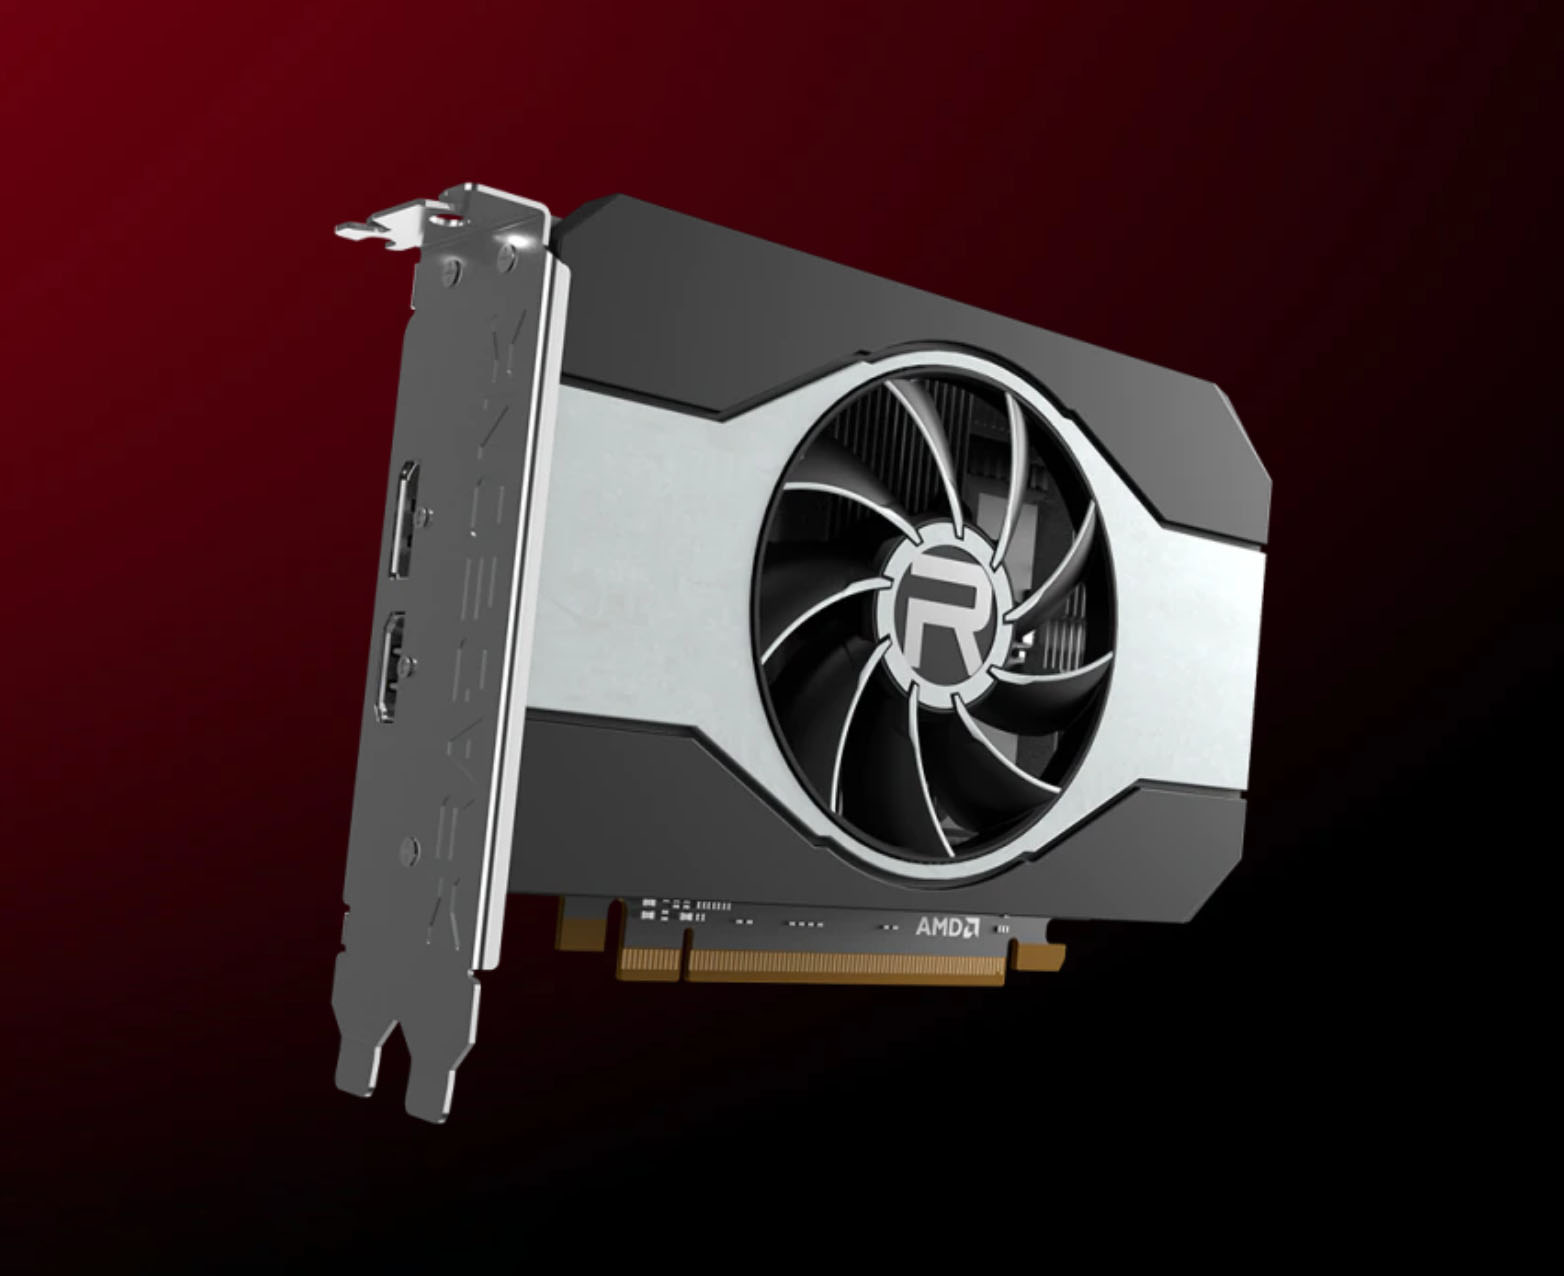 AMD announces the $329 RX 7600 XT, bringing 16GB of VRAM to its lowliest  RDNA 3 chip